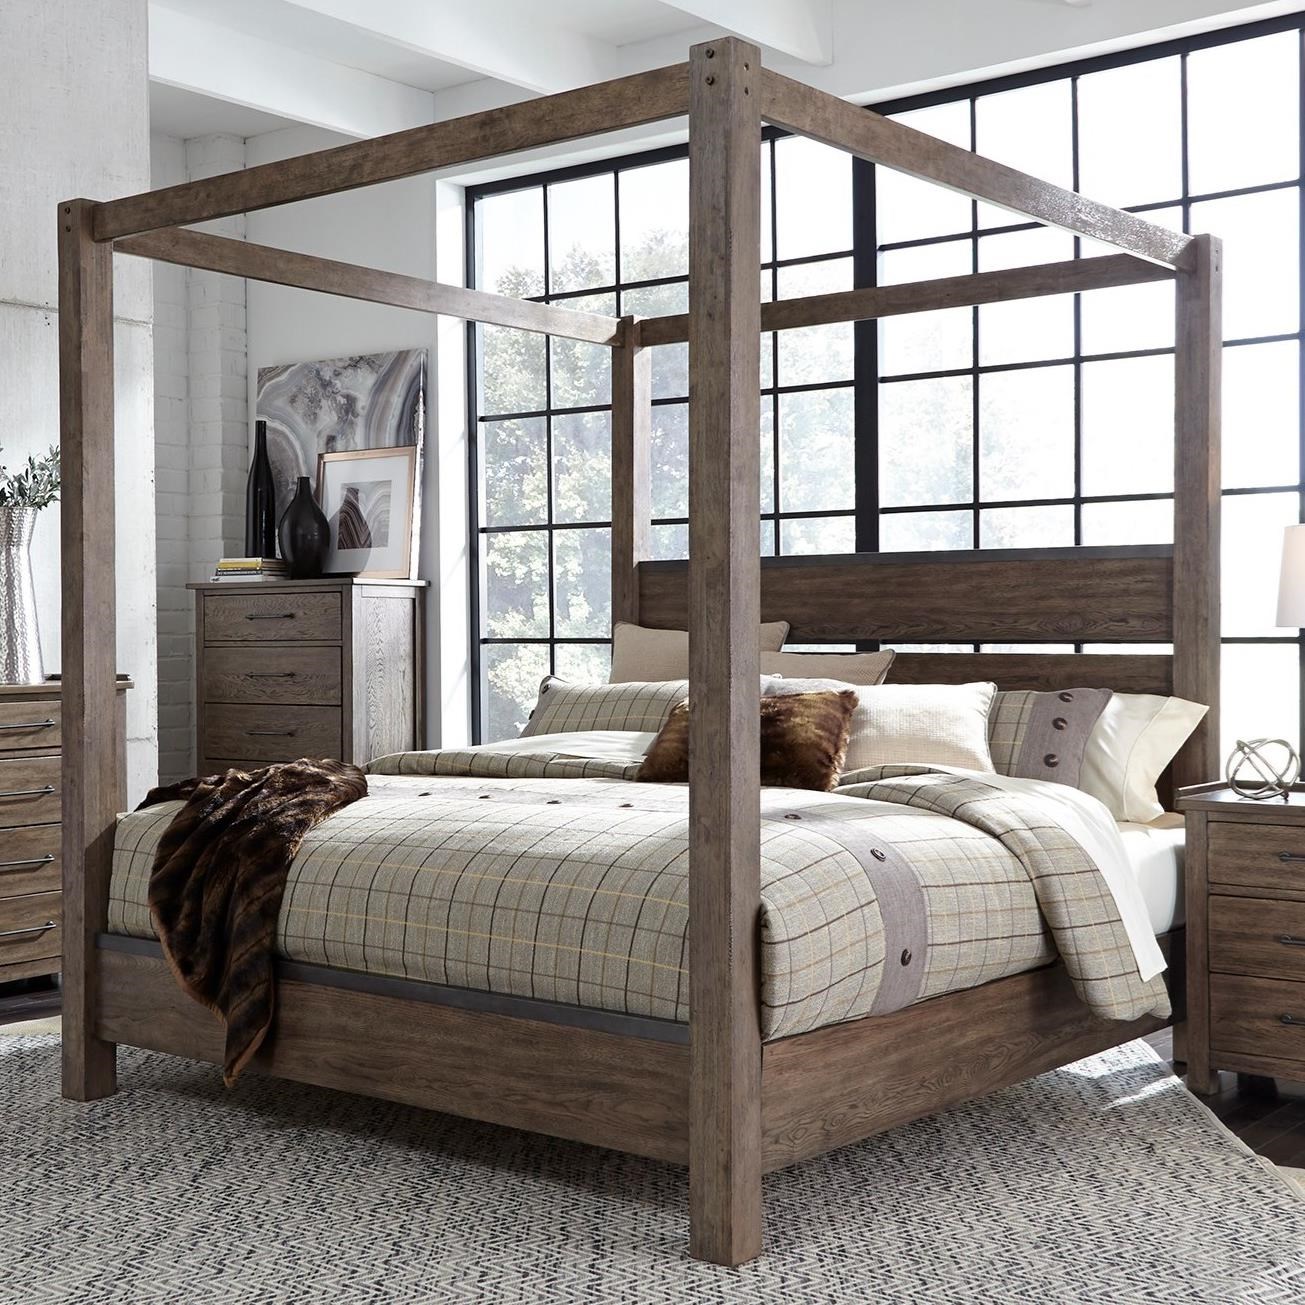 canopy bunk bed